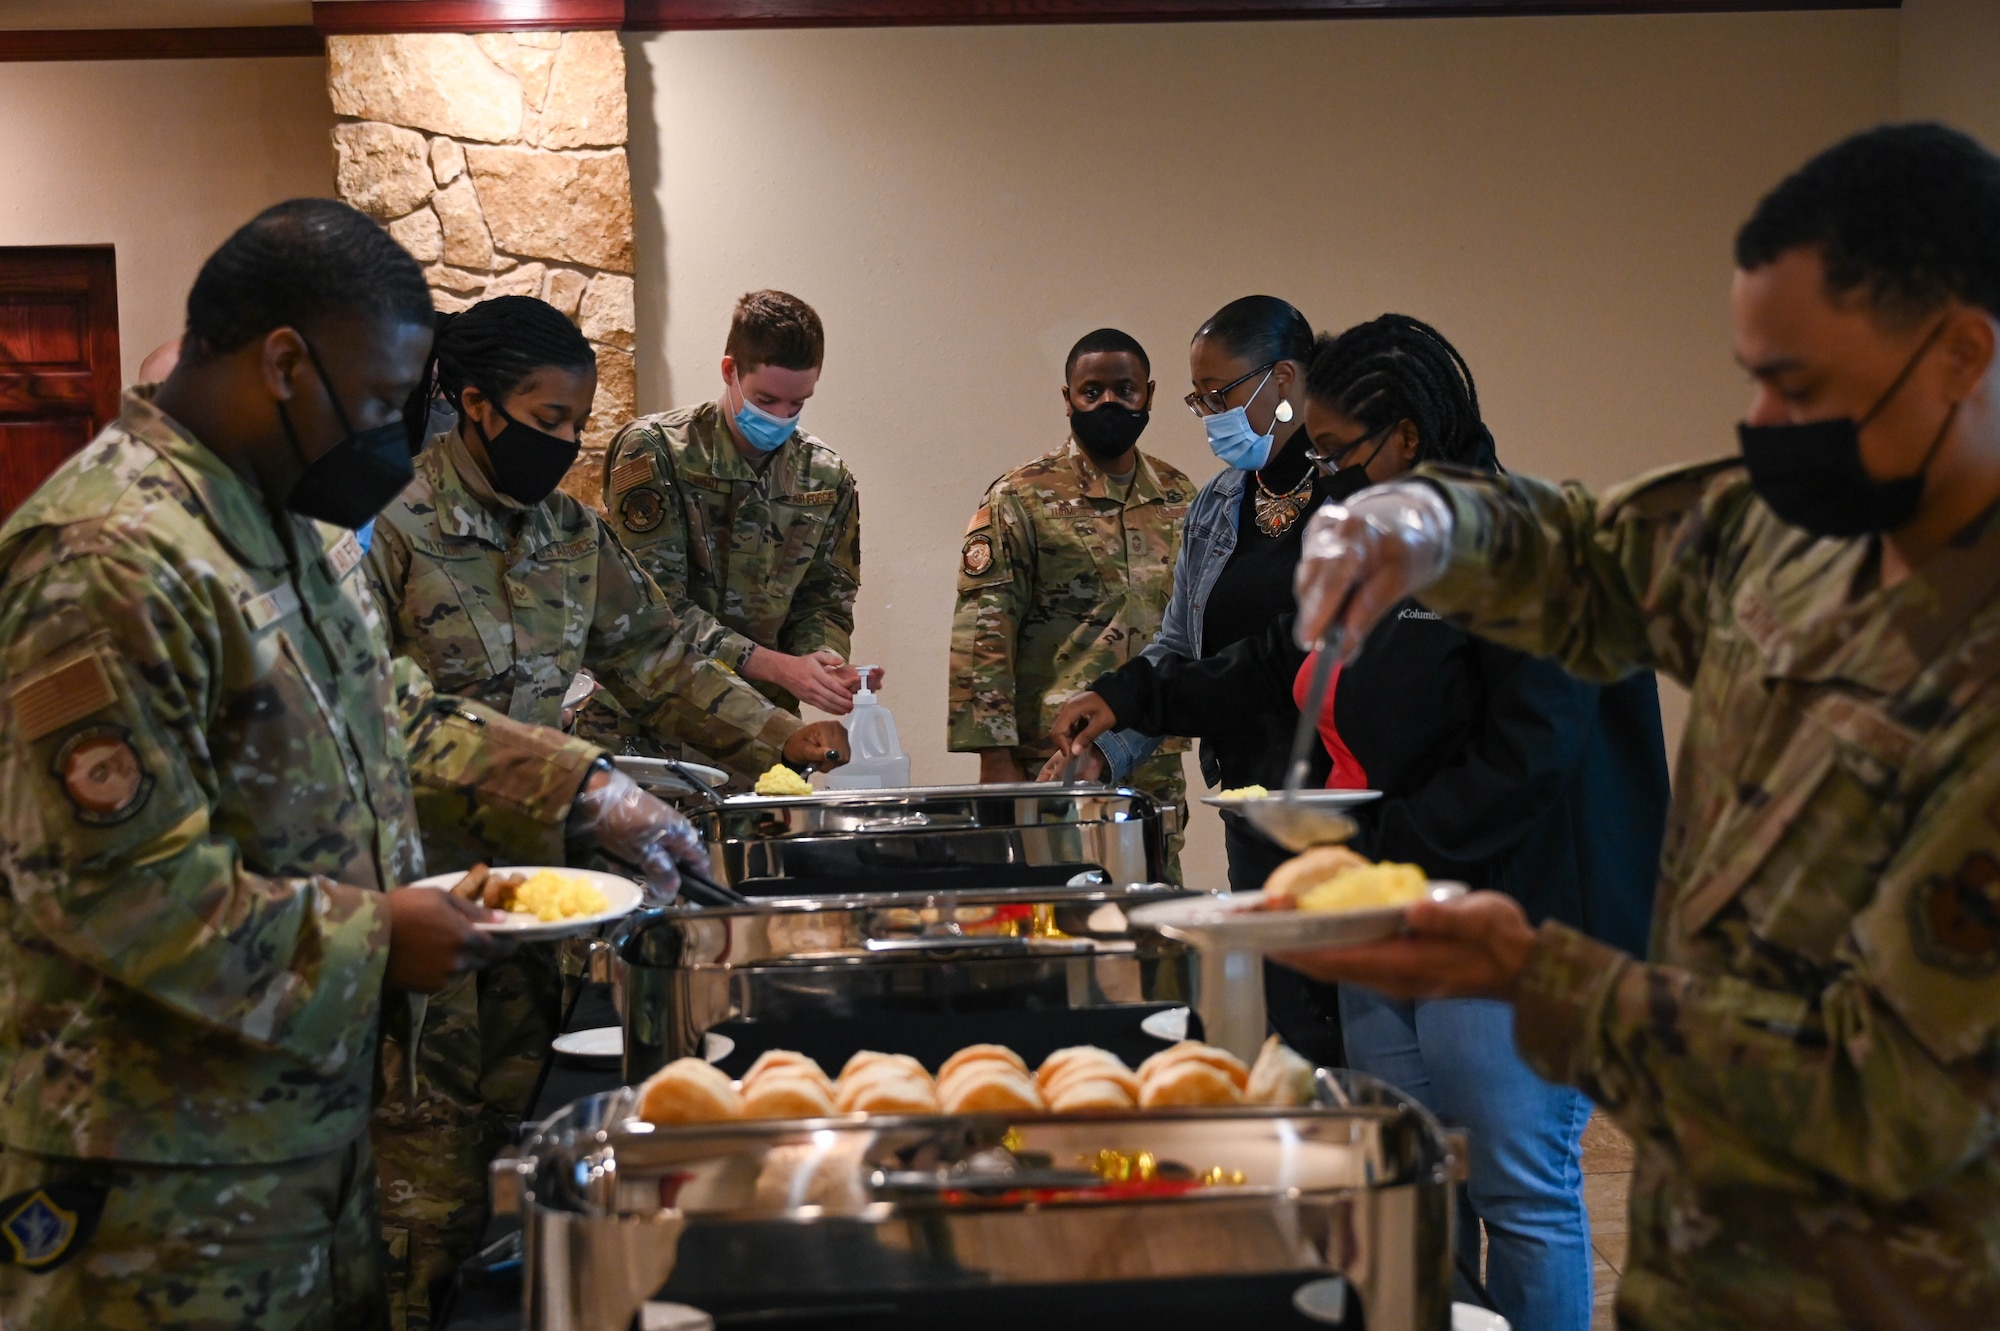 Members from the 97th Air Mobility Wing make their plates at the Martin Luther King Jr. breakfast at Altus Air Force Base, Oklahoma, January 14, 2022. The event took place in remembrance of Dr. Martin Luther King Jr. and to open discussions about how to honor Dr. King during MLK weekend. (U.S. Air Force photo by Senior Airman Kayla Christenson)